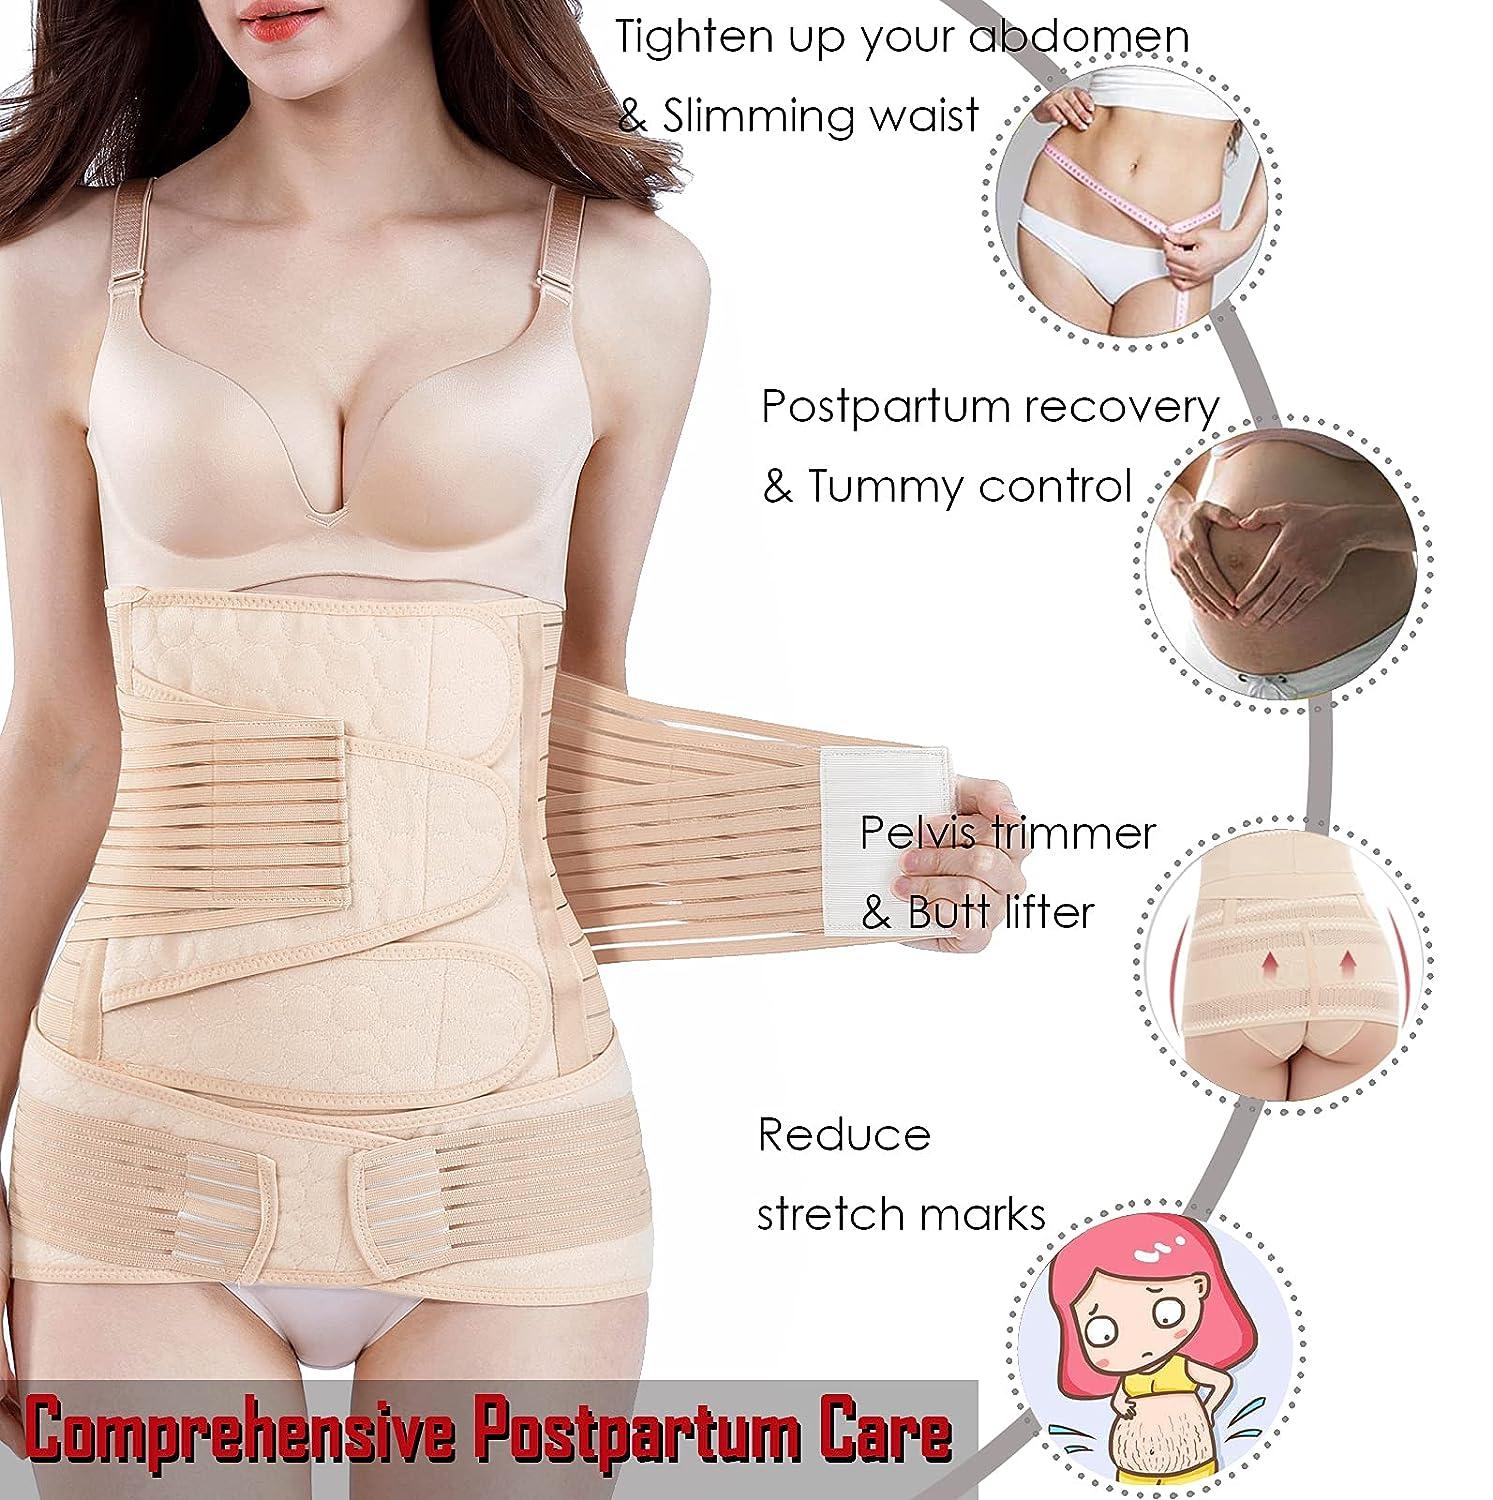 ChongErfei 2 in 1 Postpartum Belly Wrap Support Recovery Belt